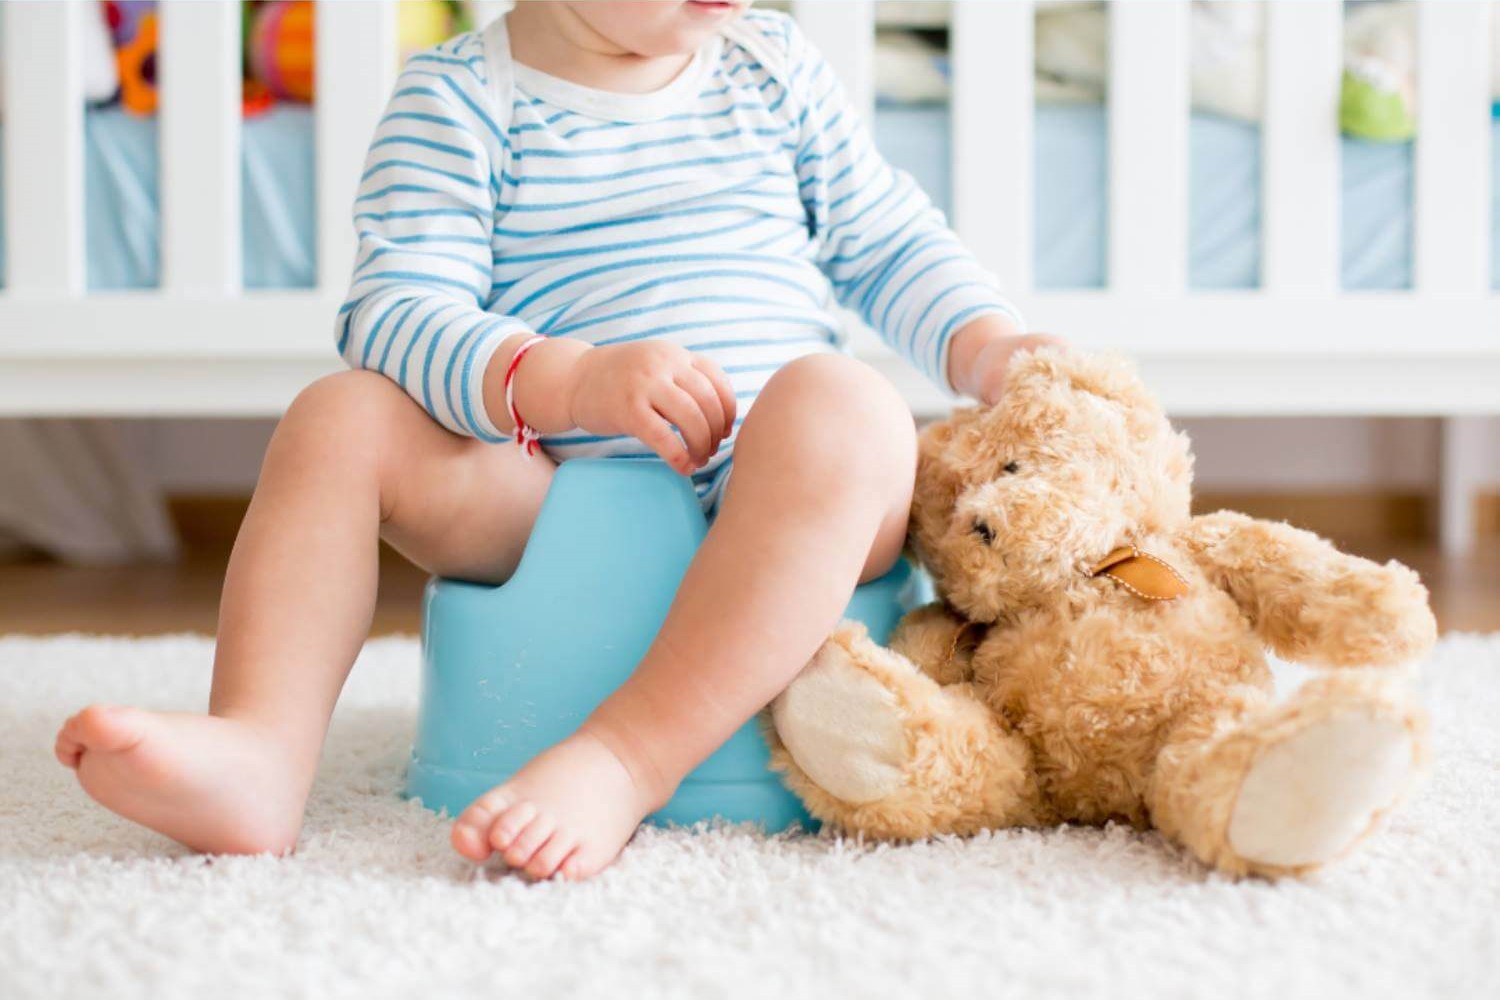 Potty Training: When and How To Start